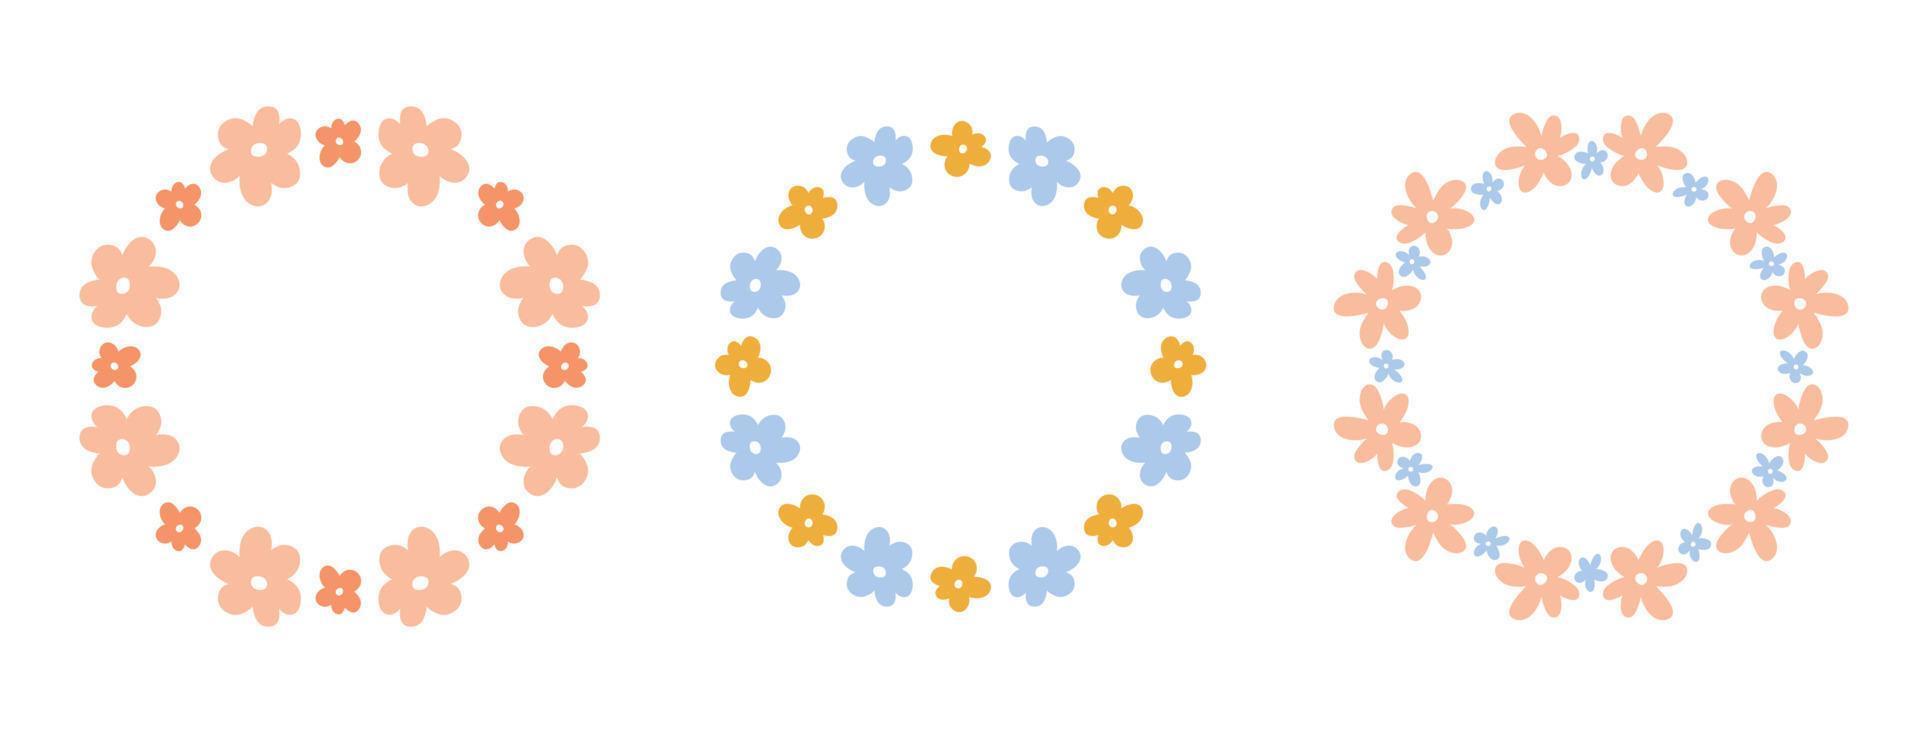 Set of cute floral wreaths with tiny flowers isolated on white background. Vector hand-drawn flat illustration. Perfect for cards, invitations, decorations, logo, various designs.